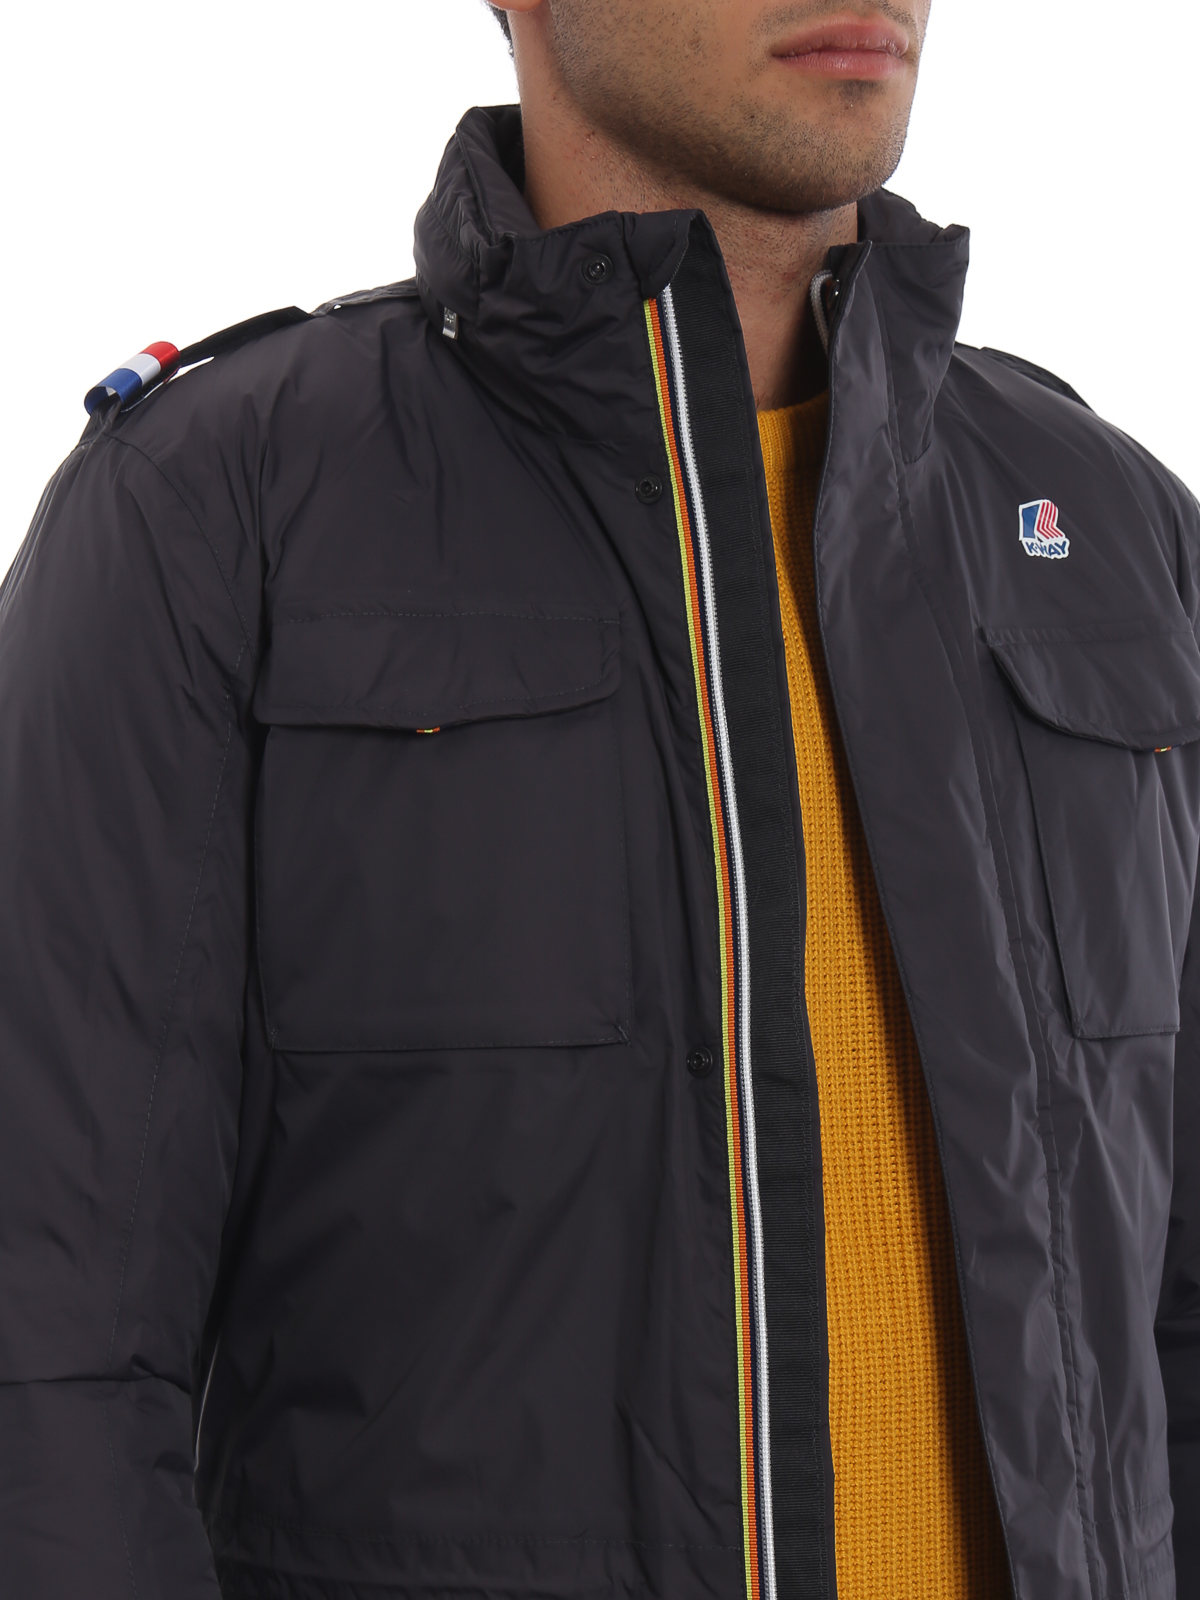 Instituut oven Komkommer Padded jackets k-way - Manfield Thermo Plus slim fit padded jacket -  K001K60A03